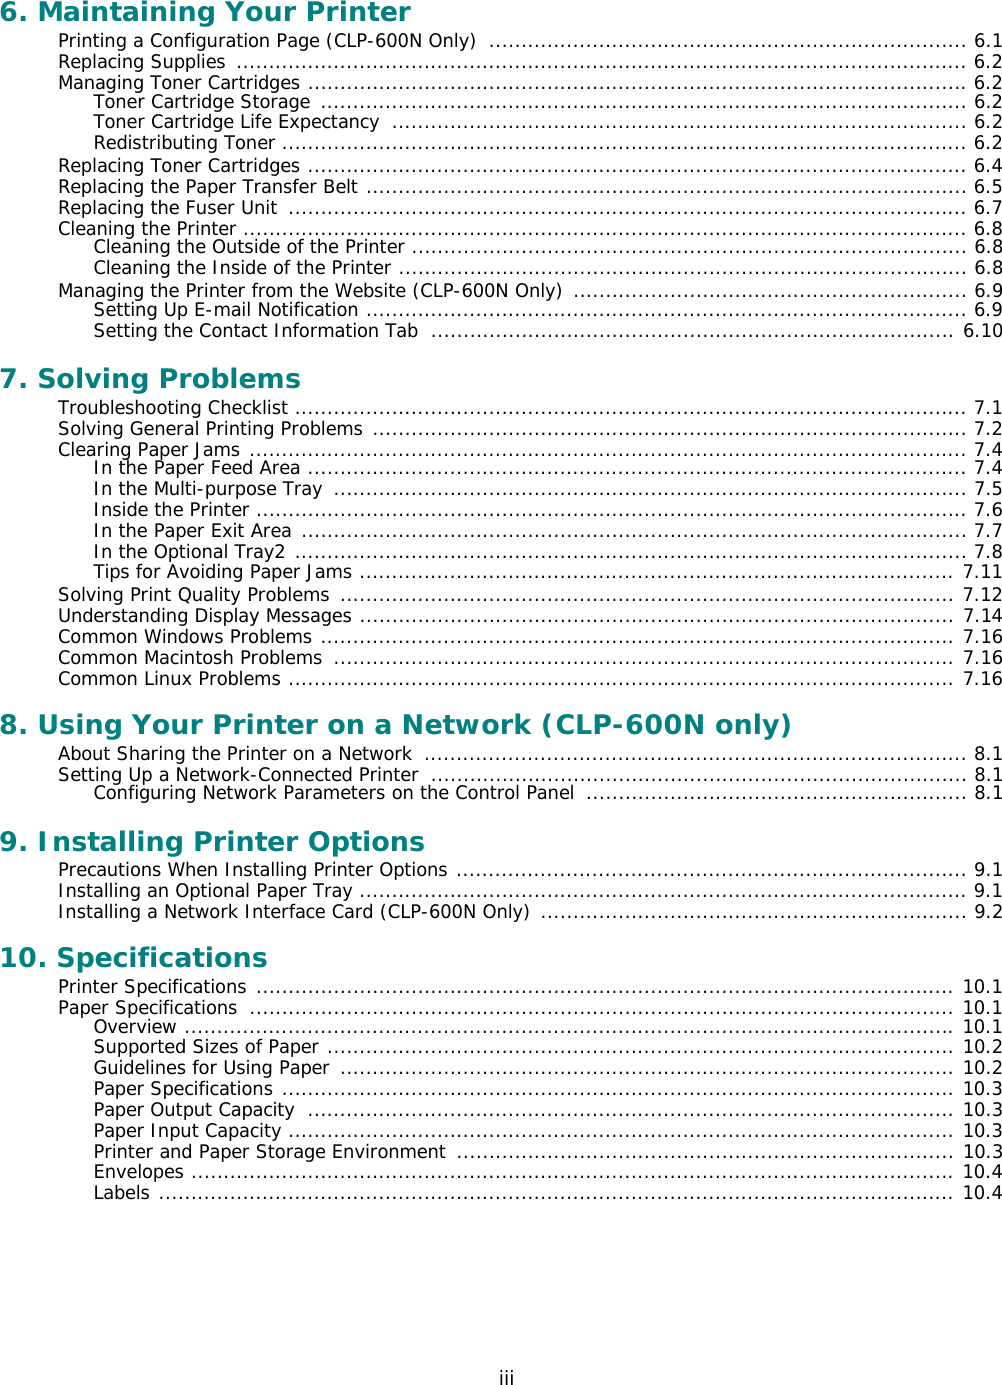 iii6. Maintaining Your PrinterPrinting a Configuration Page (CLP-600N Only)  .......................................................................... 6.1Replacing Supplies  ................................................................................................................. 6.2Managing Toner Cartridges ...................................................................................................... 6.2Toner Cartridge Storage  .................................................................................................... 6.2Toner Cartridge Life Expectancy  ......................................................................................... 6.2Redistributing Toner .......................................................................................................... 6.2Replacing Toner Cartridges ...................................................................................................... 6.4Replacing the Paper Transfer Belt ............................................................................................. 6.5Replacing the Fuser Unit  ......................................................................................................... 6.7Cleaning the Printer ................................................................................................................ 6.8Cleaning the Outside of the Printer ...................................................................................... 6.8Cleaning the Inside of the Printer ........................................................................................ 6.8Managing the Printer from the Website (CLP-600N Only) ............................................................. 6.9Setting Up E-mail Notification ............................................................................................. 6.9Setting the Contact Information Tab  ................................................................................. 6.107. Solving ProblemsTroubleshooting Checklist ........................................................................................................ 7.1Solving General Printing Problems ............................................................................................ 7.2Clearing Paper Jams ............................................................................................................... 7.4In the Paper Feed Area ...................................................................................................... 7.4In the Multi-purpose Tray  .................................................................................................. 7.5Inside the Printer .............................................................................................................. 7.6In the Paper Exit Area ....................................................................................................... 7.7In the Optional Tray2 ........................................................................................................ 7.8Tips for Avoiding Paper Jams ............................................................................................ 7.11Solving Print Quality Problems  ............................................................................................... 7.12Understanding Display Messages ............................................................................................ 7.14Common Windows Problems .................................................................................................. 7.16Common Macintosh Problems  ................................................................................................ 7.16Common Linux Problems ....................................................................................................... 7.168. Using Your Printer on a Network (CLP-600N only)About Sharing the Printer on a Network  .................................................................................... 8.1Setting Up a Network-Connected Printer  ................................................................................... 8.1Configuring Network Parameters on the Control Panel  ........................................................... 8.19. Installing Printer OptionsPrecautions When Installing Printer Options ............................................................................... 9.1Installing an Optional Paper Tray .............................................................................................. 9.1Installing a Network Interface Card (CLP-600N Only) .................................................................. 9.210. SpecificationsPrinter Specifications ............................................................................................................ 10.1Paper Specifications  ............................................................................................................. 10.1Overview ....................................................................................................................... 10.1Supported Sizes of Paper ................................................................................................. 10.2Guidelines for Using Paper  ............................................................................................... 10.2Paper Specifications ........................................................................................................ 10.3Paper Output Capacity  .................................................................................................... 10.3Paper Input Capacity ....................................................................................................... 10.3Printer and Paper Storage Environment  ............................................................................. 10.3Envelopes ...................................................................................................................... 10.4Labels ........................................................................................................................... 10.4